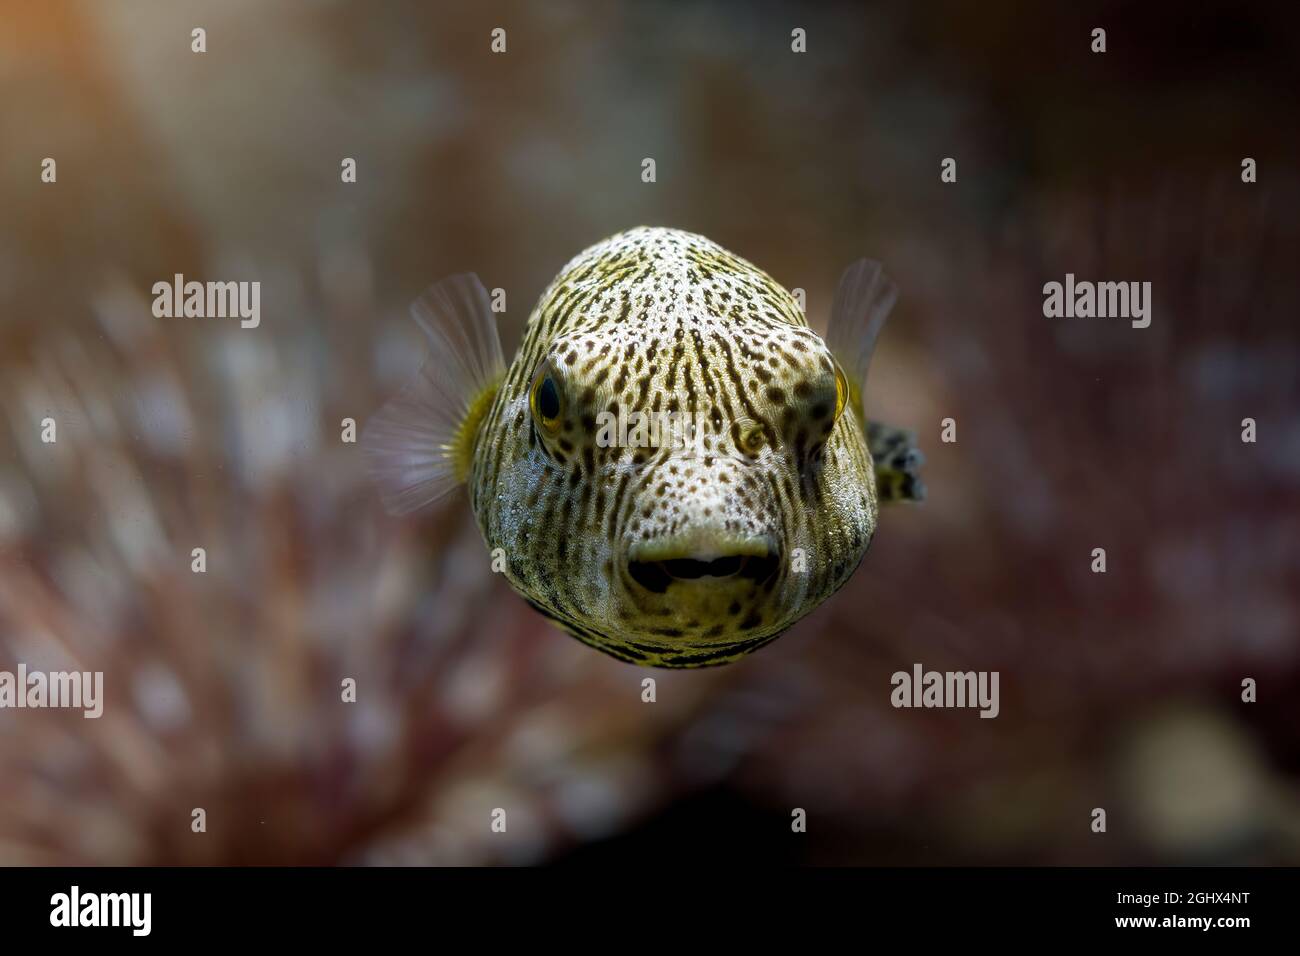 Close-up of a puffer fish swimming underwater Stock Photo